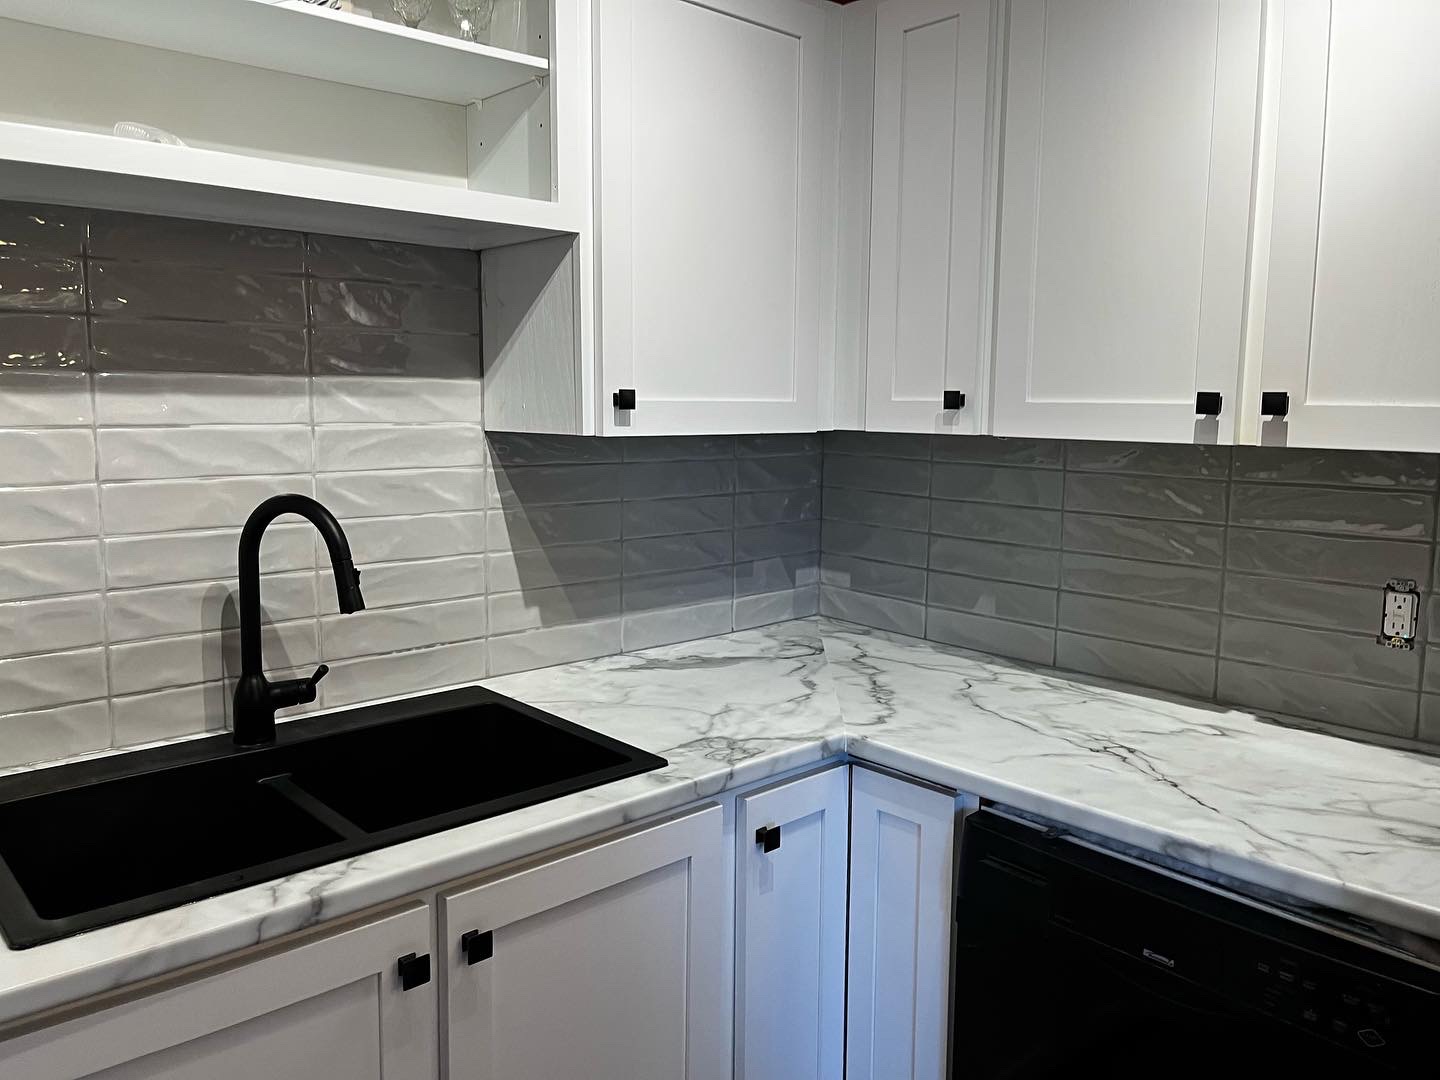 A grey tile backsplash over a calacatta laminate countertop with ablack granite sink and white cabinets creates a very modern kitchen look